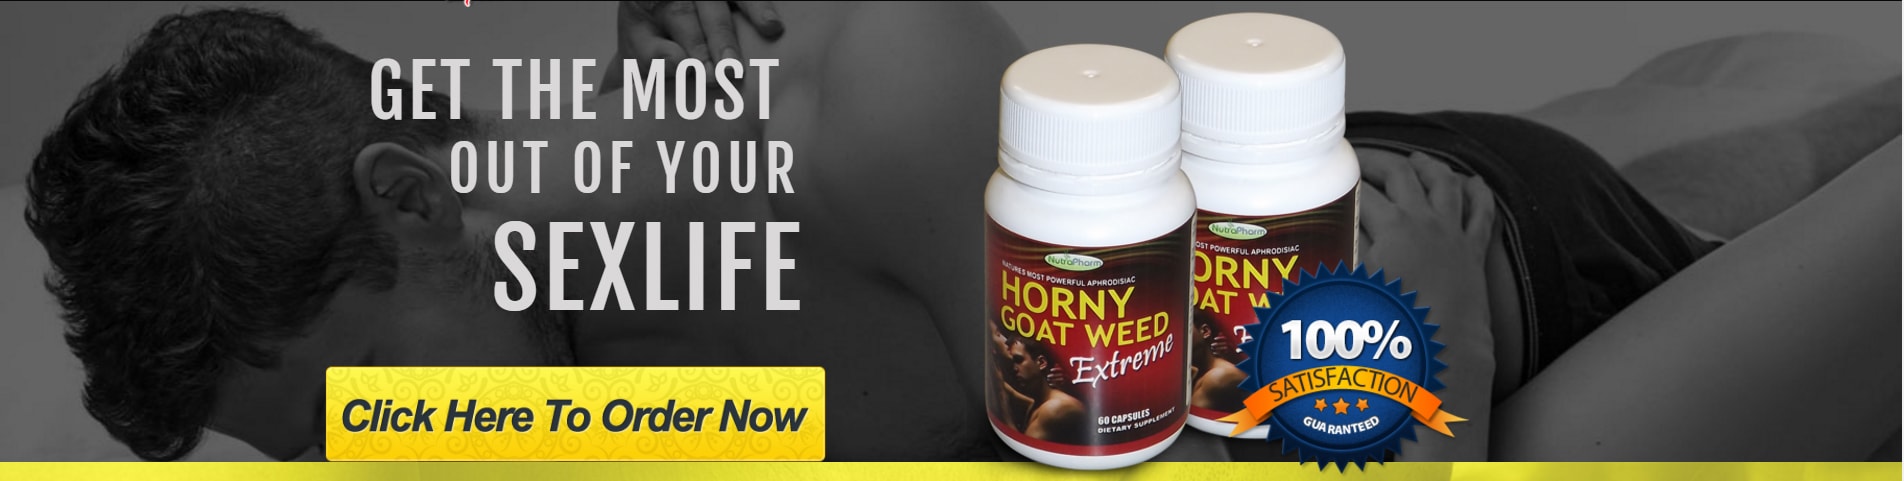 Horny Goatweed Extreme - Natural Powerful Aphrodisiac for American Men and Women